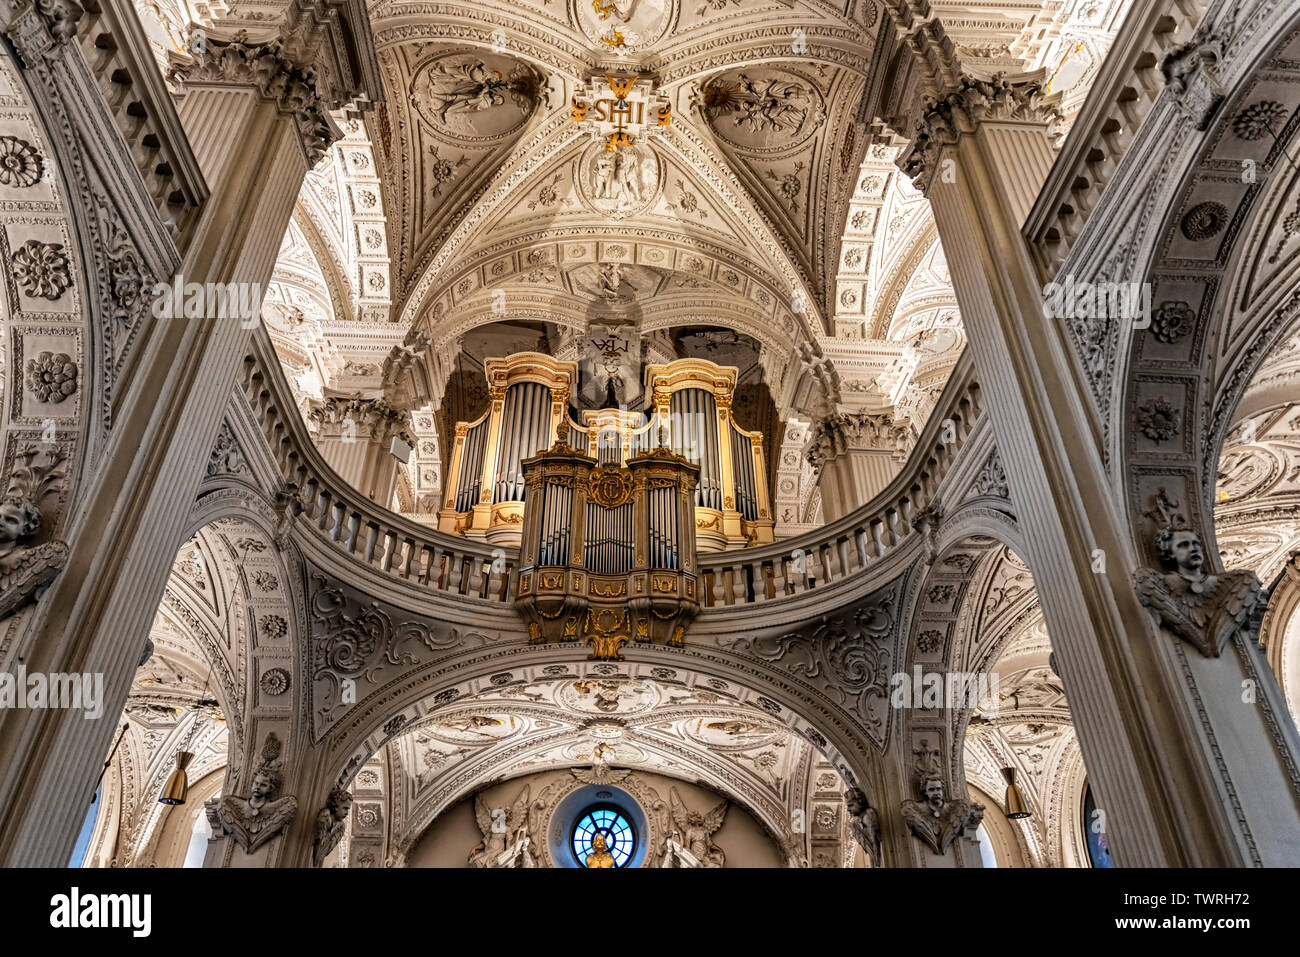 View at the interior of St. Andreas Kirche, Saint Andrews church, Duesseldorf, Germany Stock Photo